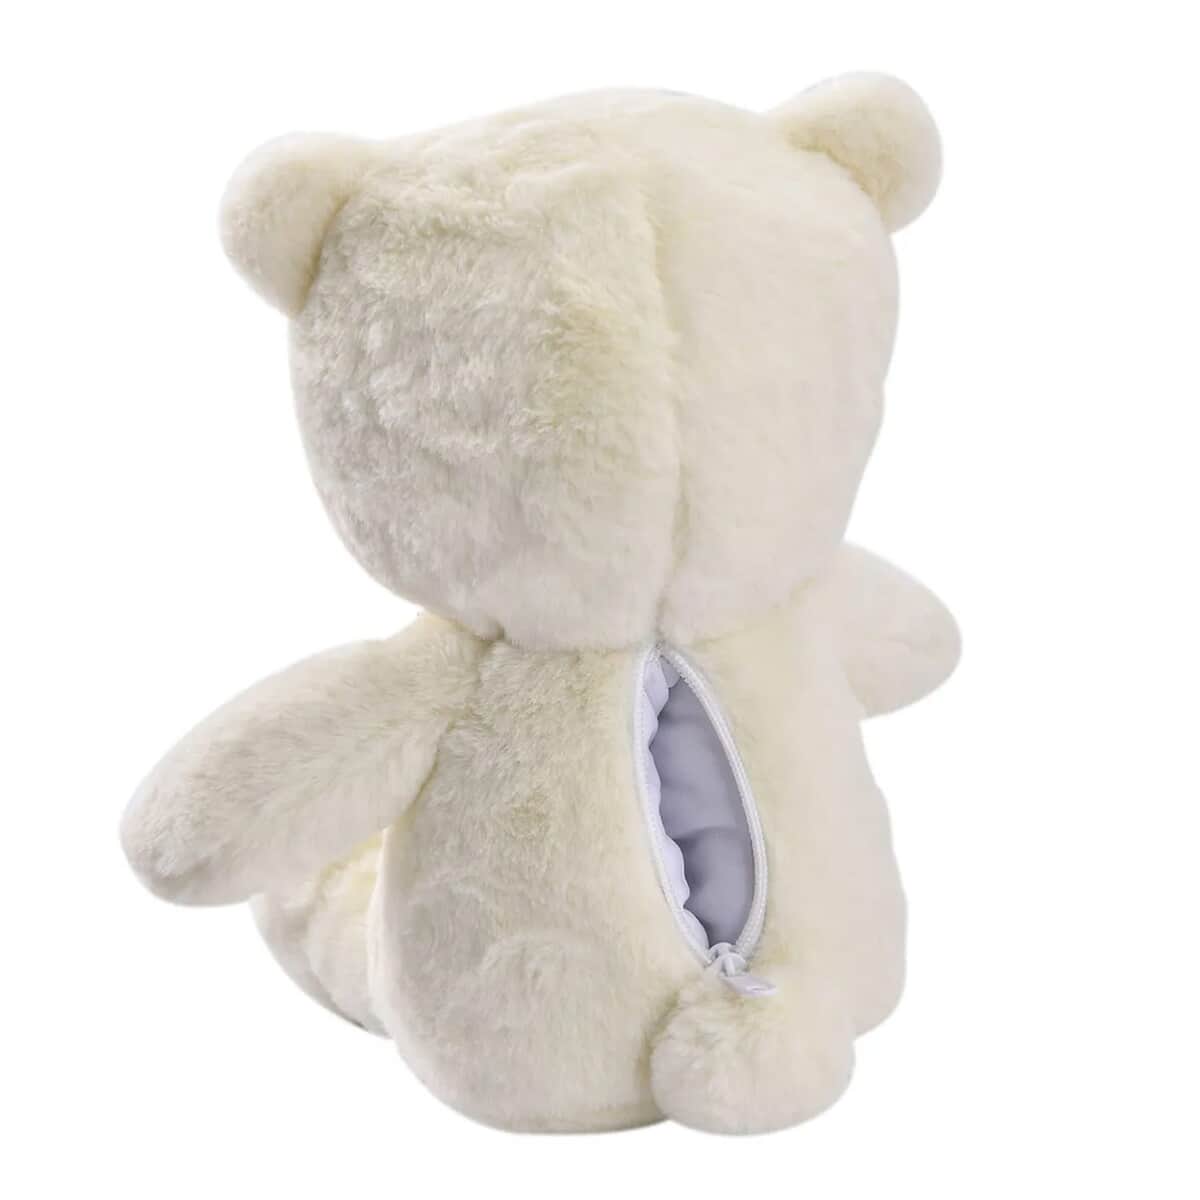 Off White Teddy Bear Toy with Zipper Bag (10 In) image number 6